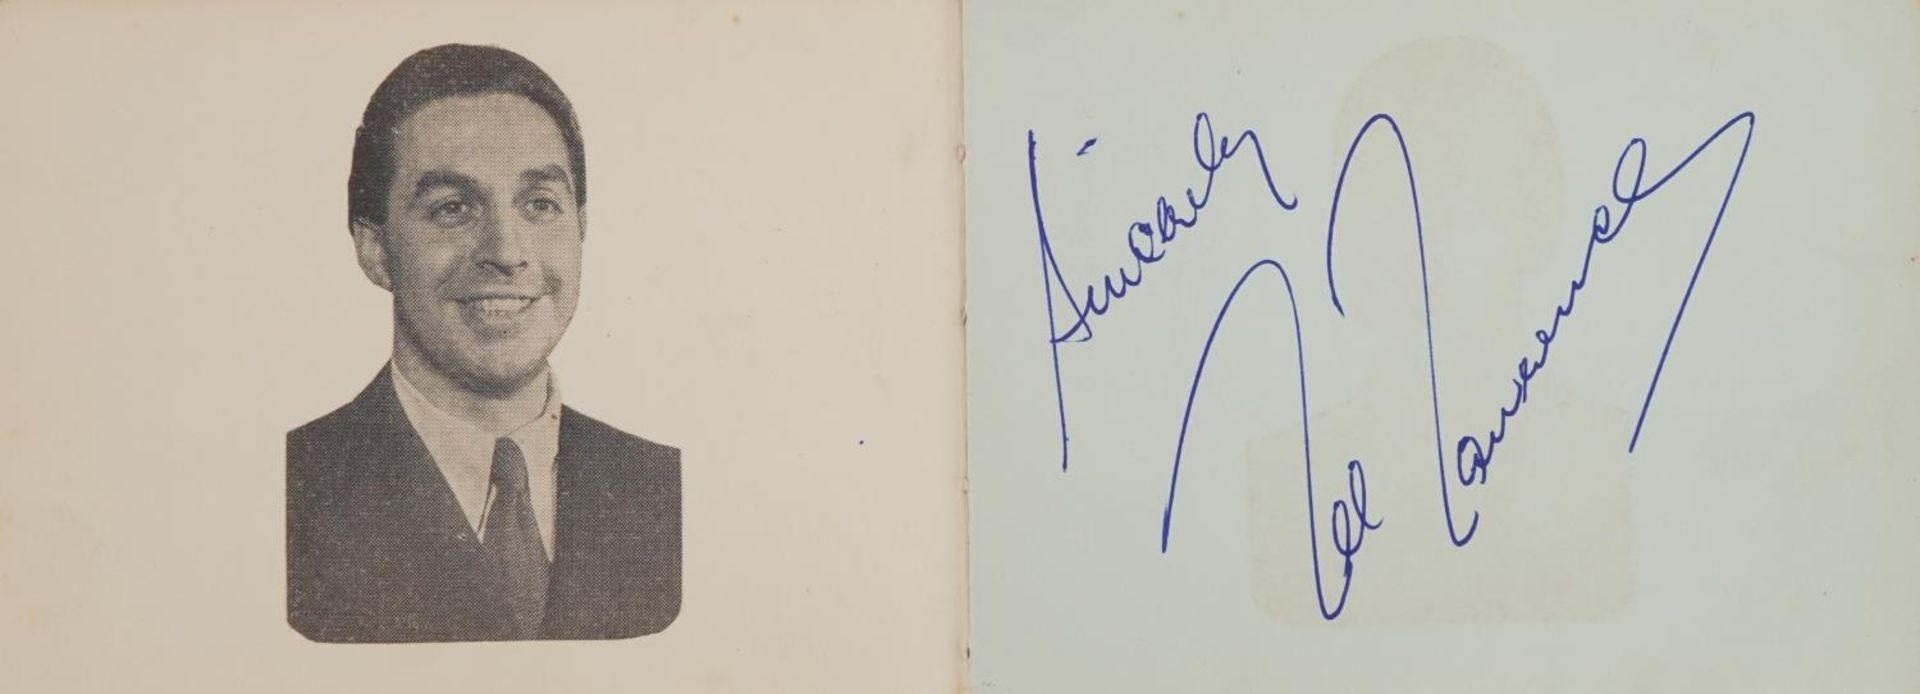 Two early 20th century autograph albums housing various autographs